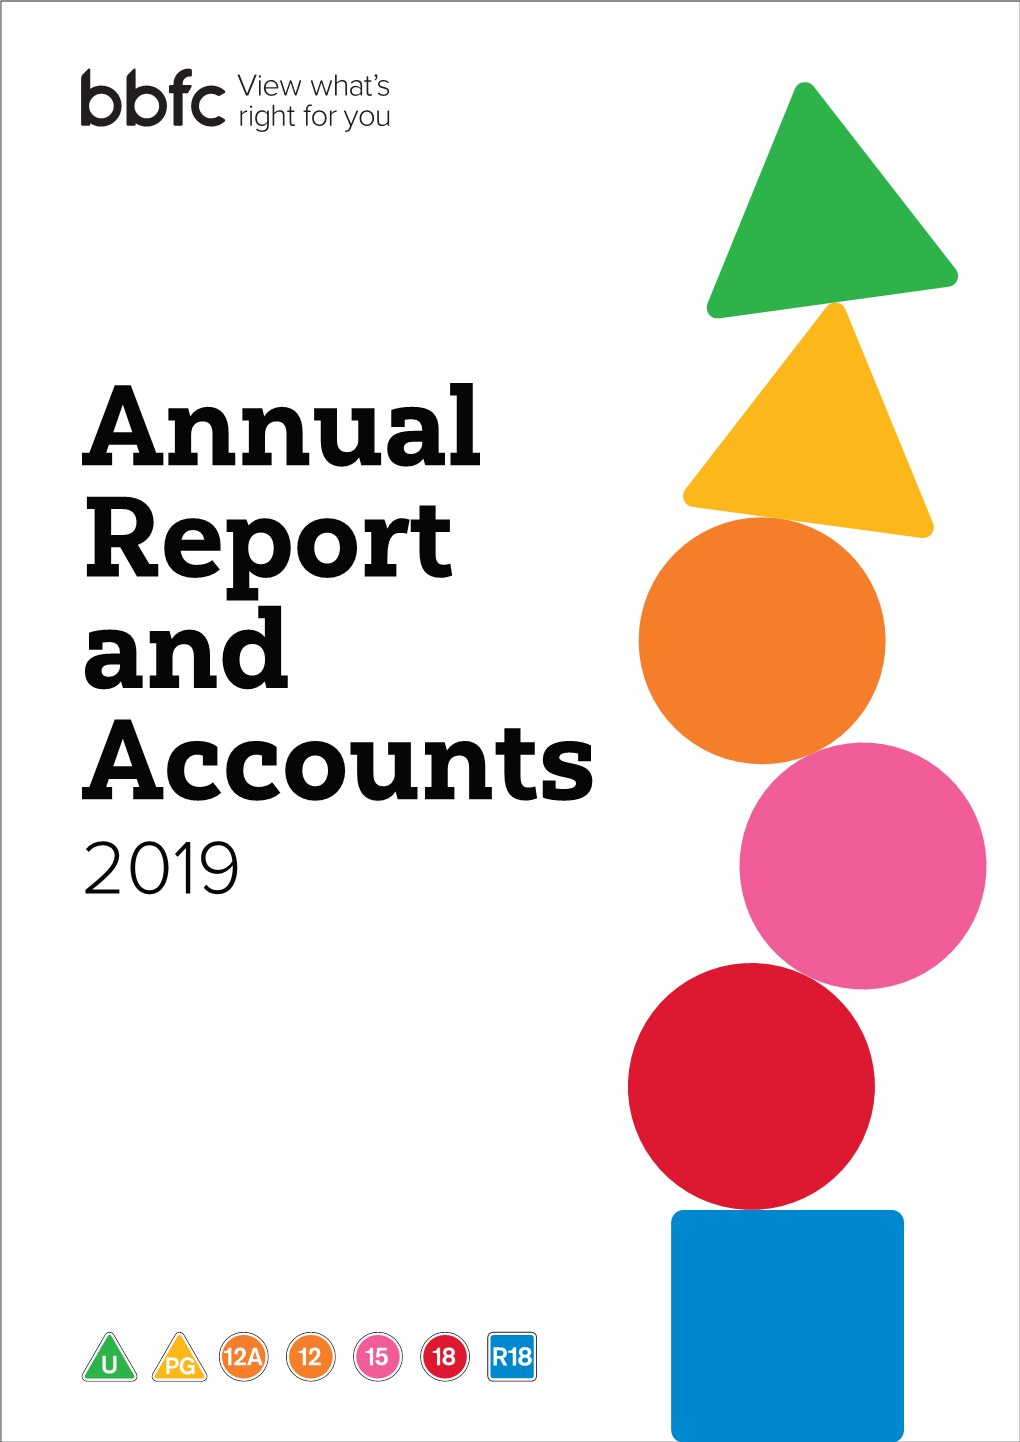 Annual Report and Accounts 2019 British Board of Film Classification Annual Report and Accounts